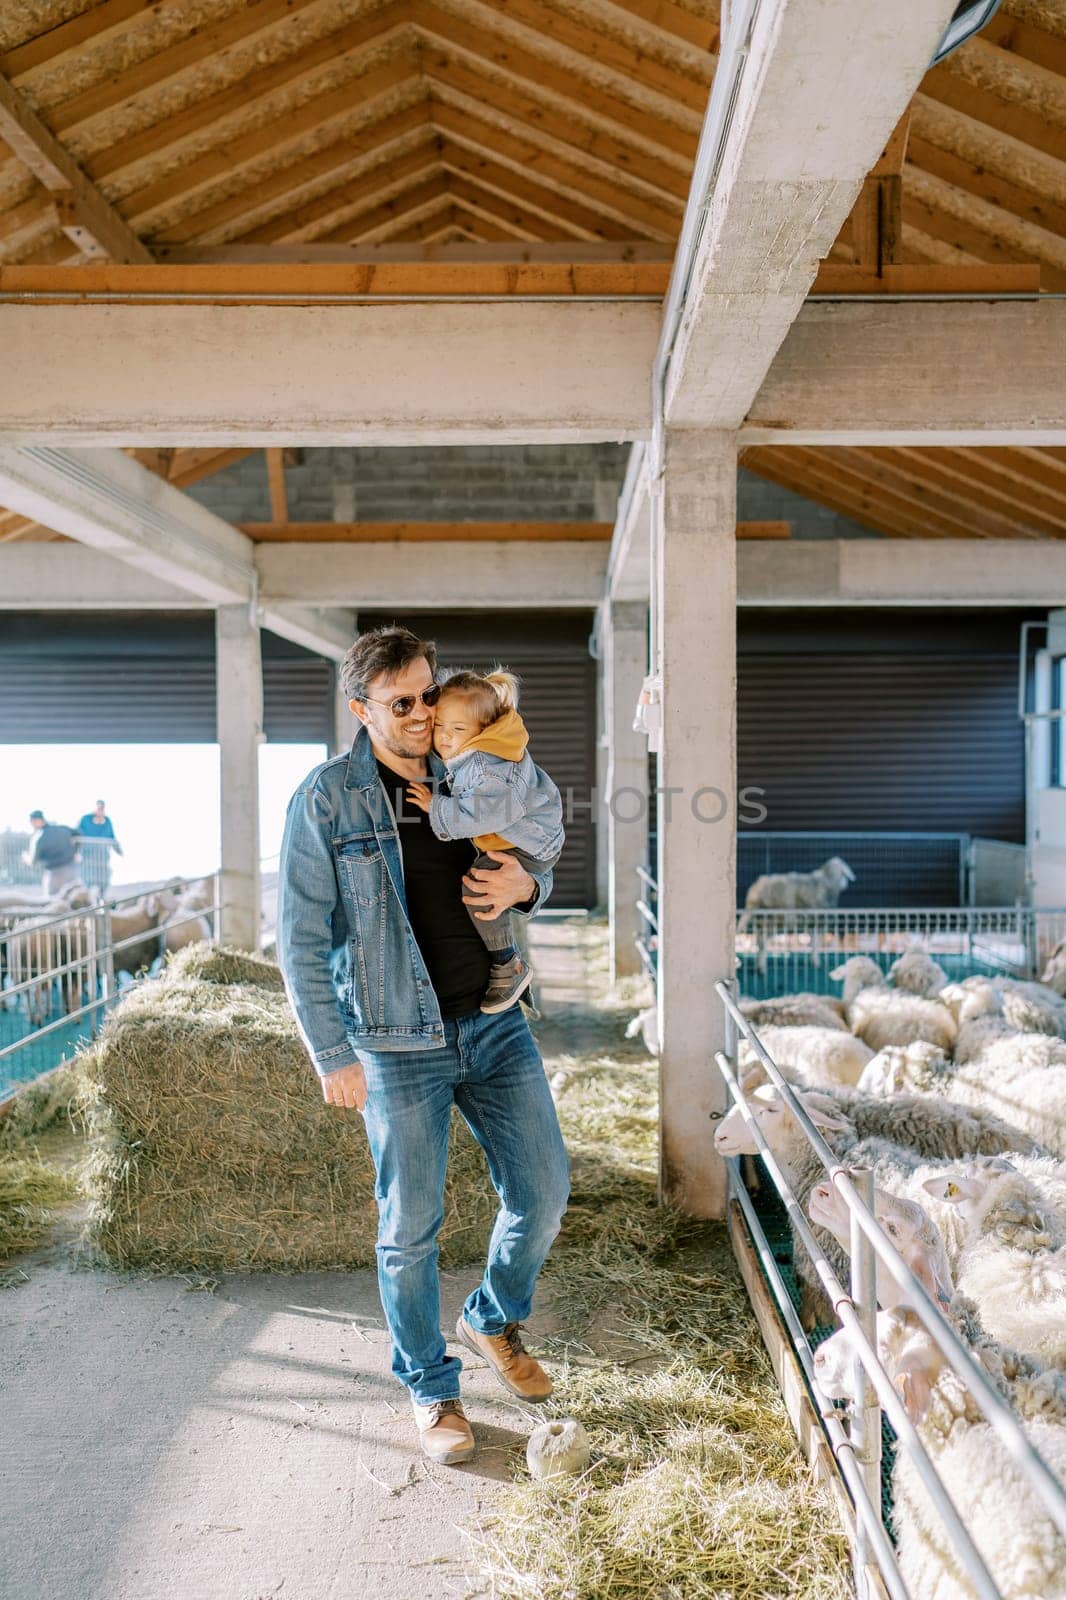 Dad with a little girl in his arms stands near a paddock with fluffy white sheep. High quality photo